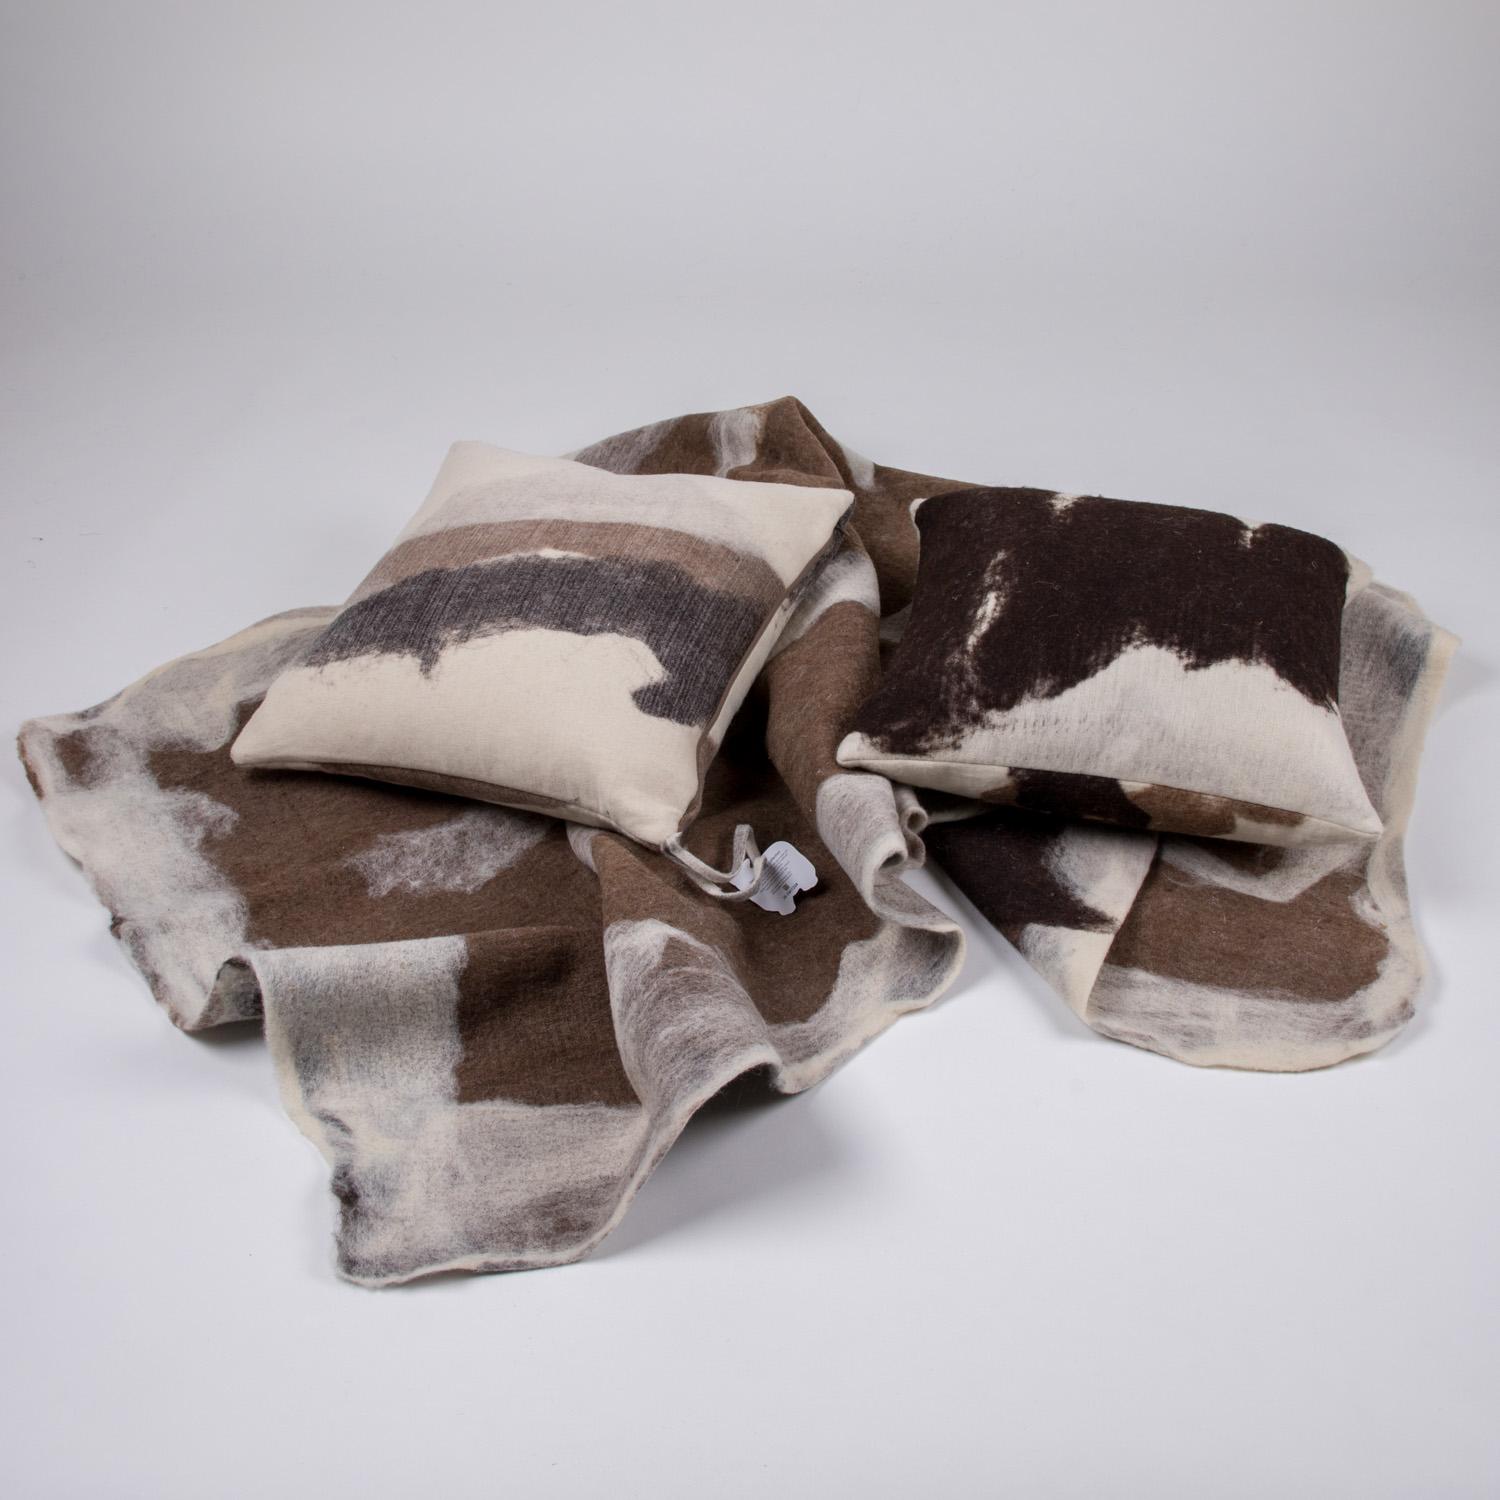 Hand-Crafted Hand-Milled Artisan Wool Pillows and Rustic Throw, Tahoe Collection For Sale